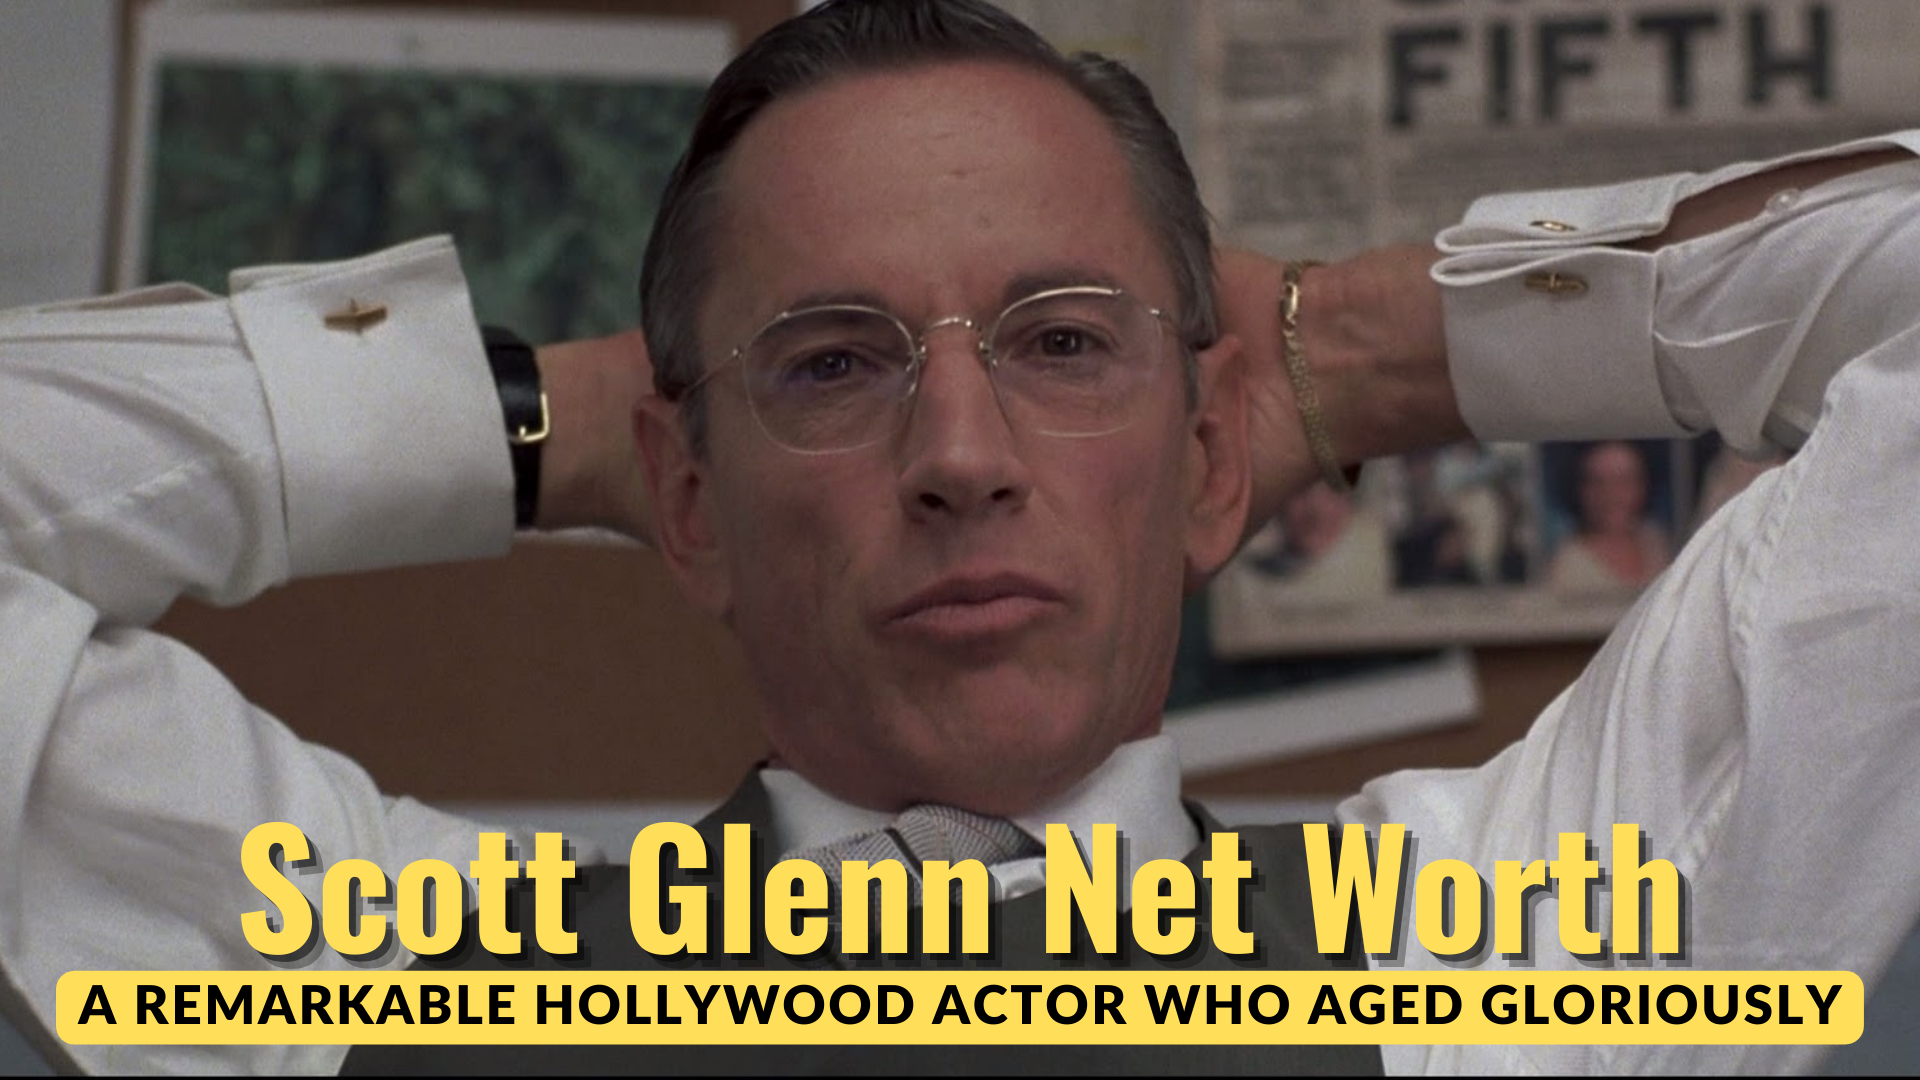 Scott Glenn Net Worth -  A Remarkable Hollywood Actor Who Aged Gloriously